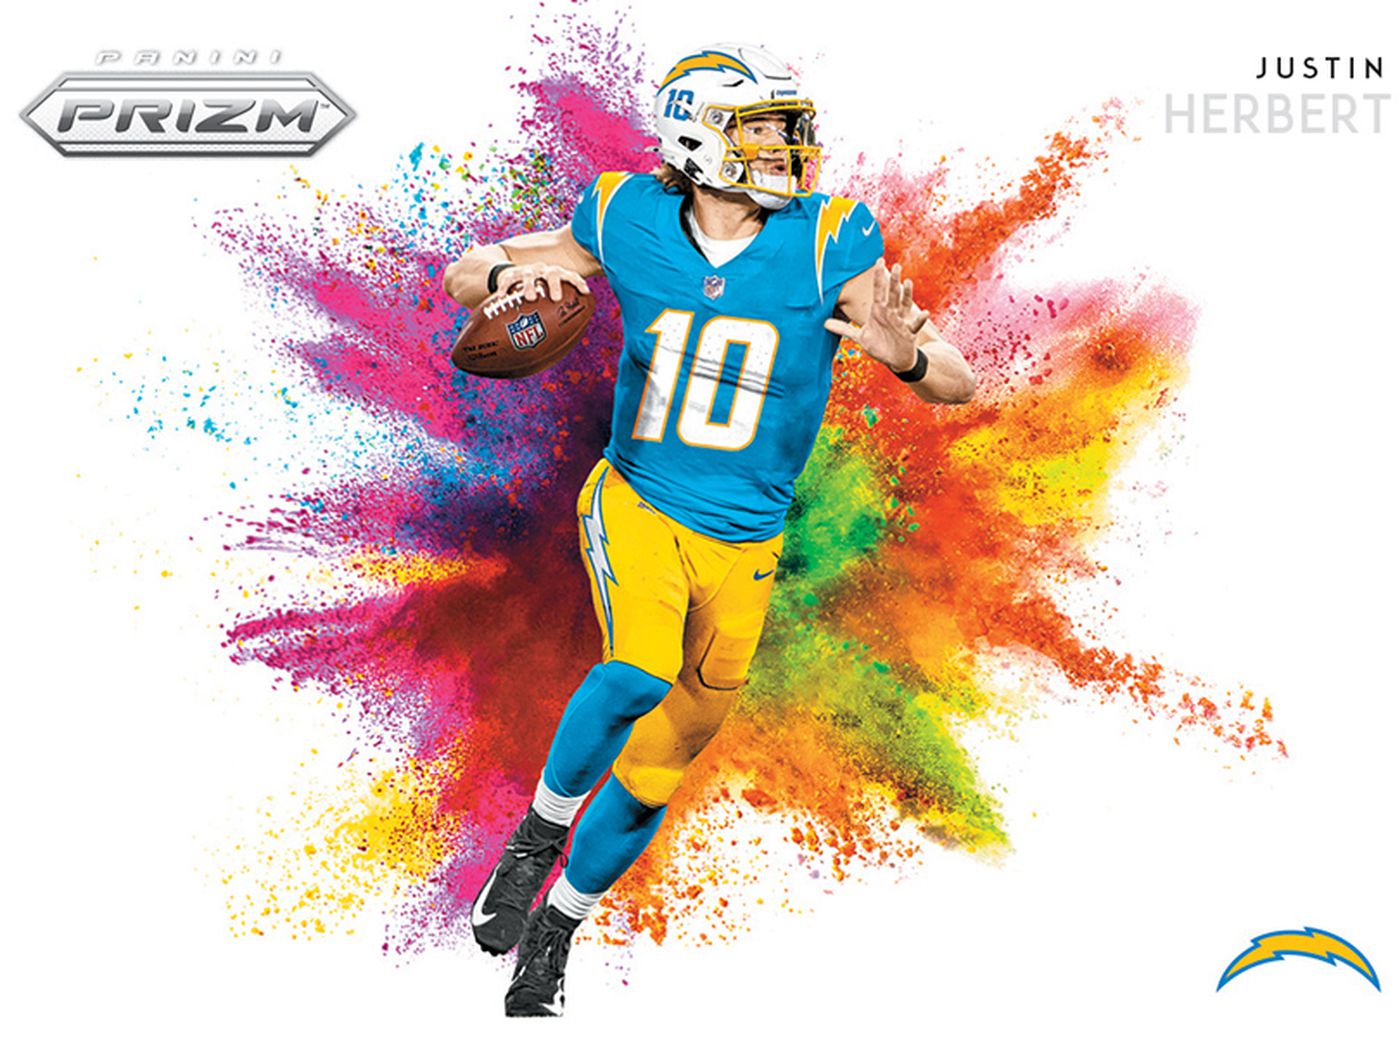 Chargers News: Rookie QB Justin Herbert featured in Panini Prizm set